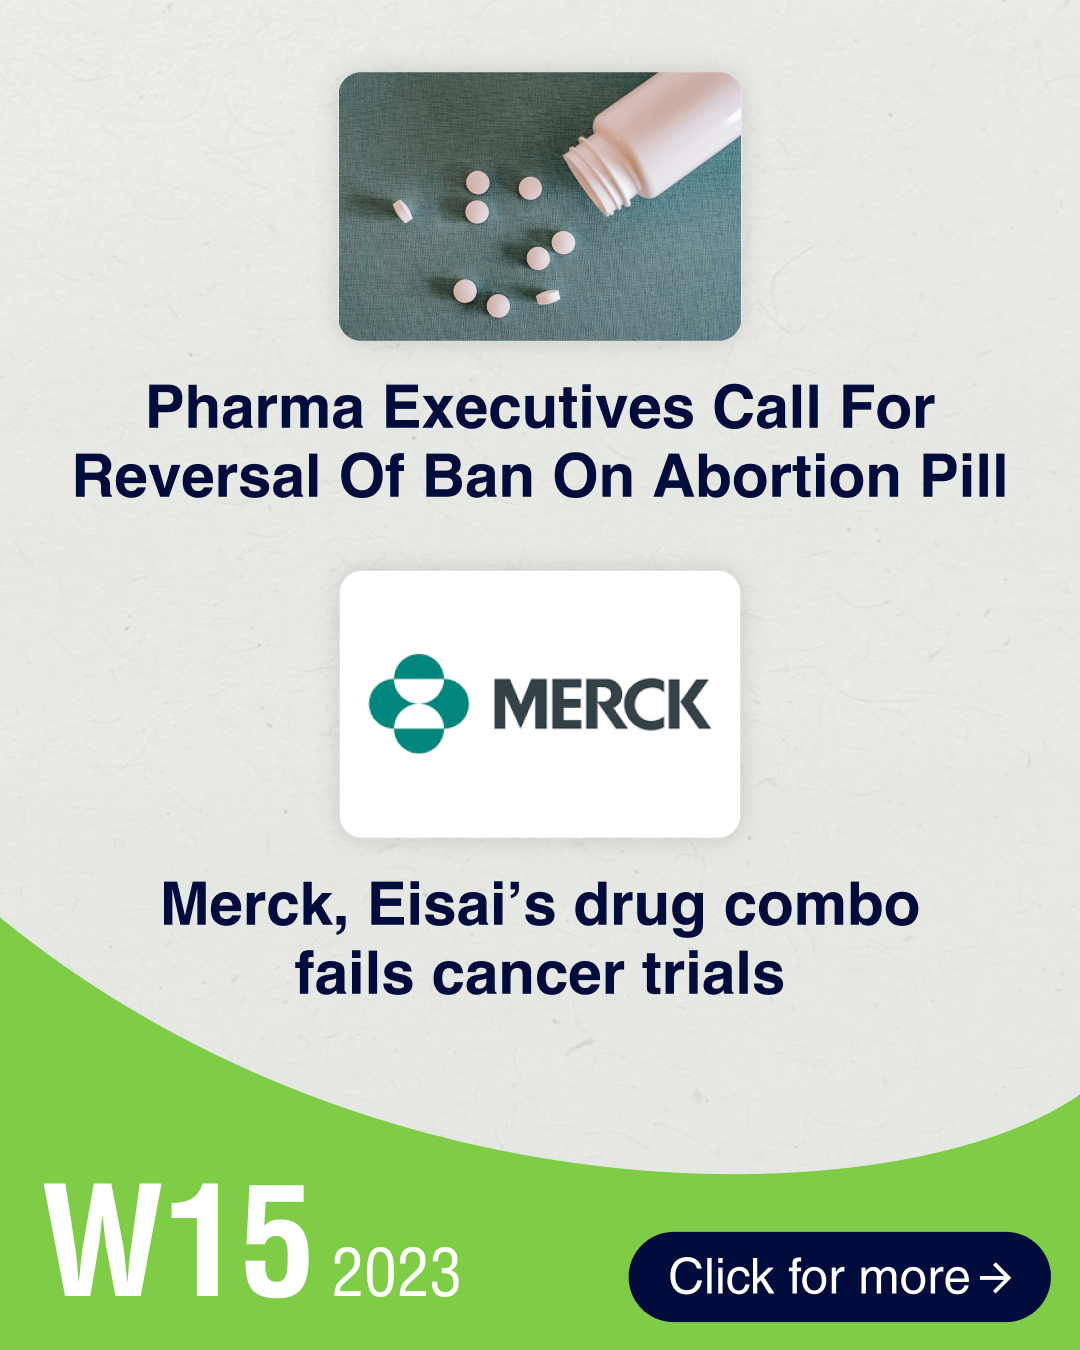 Pharma executives call for reversal of ban on abortion pill; Merck, Eisai’s drug combo fails cancer trials